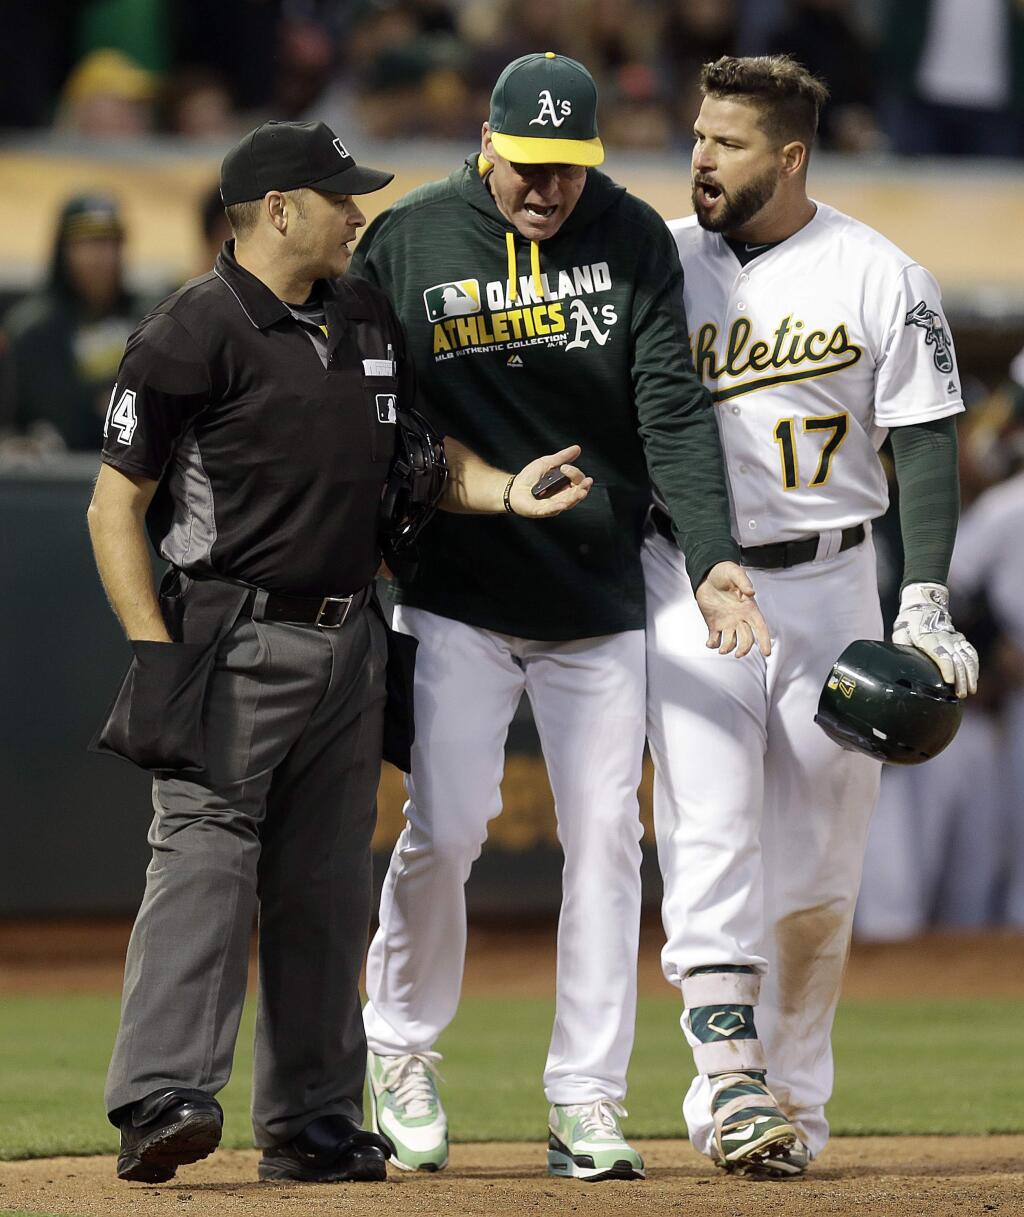 Oakland Athletics manager Bob Melvin, center, and Athletics' Yonder Alonso (17) argue with home plate umpire Mark Wegner after being ejected during the fourth inning of a baseball game Friday, July 15, 2016, in Oakland, Calif. (AP Photo/Ben Margot)